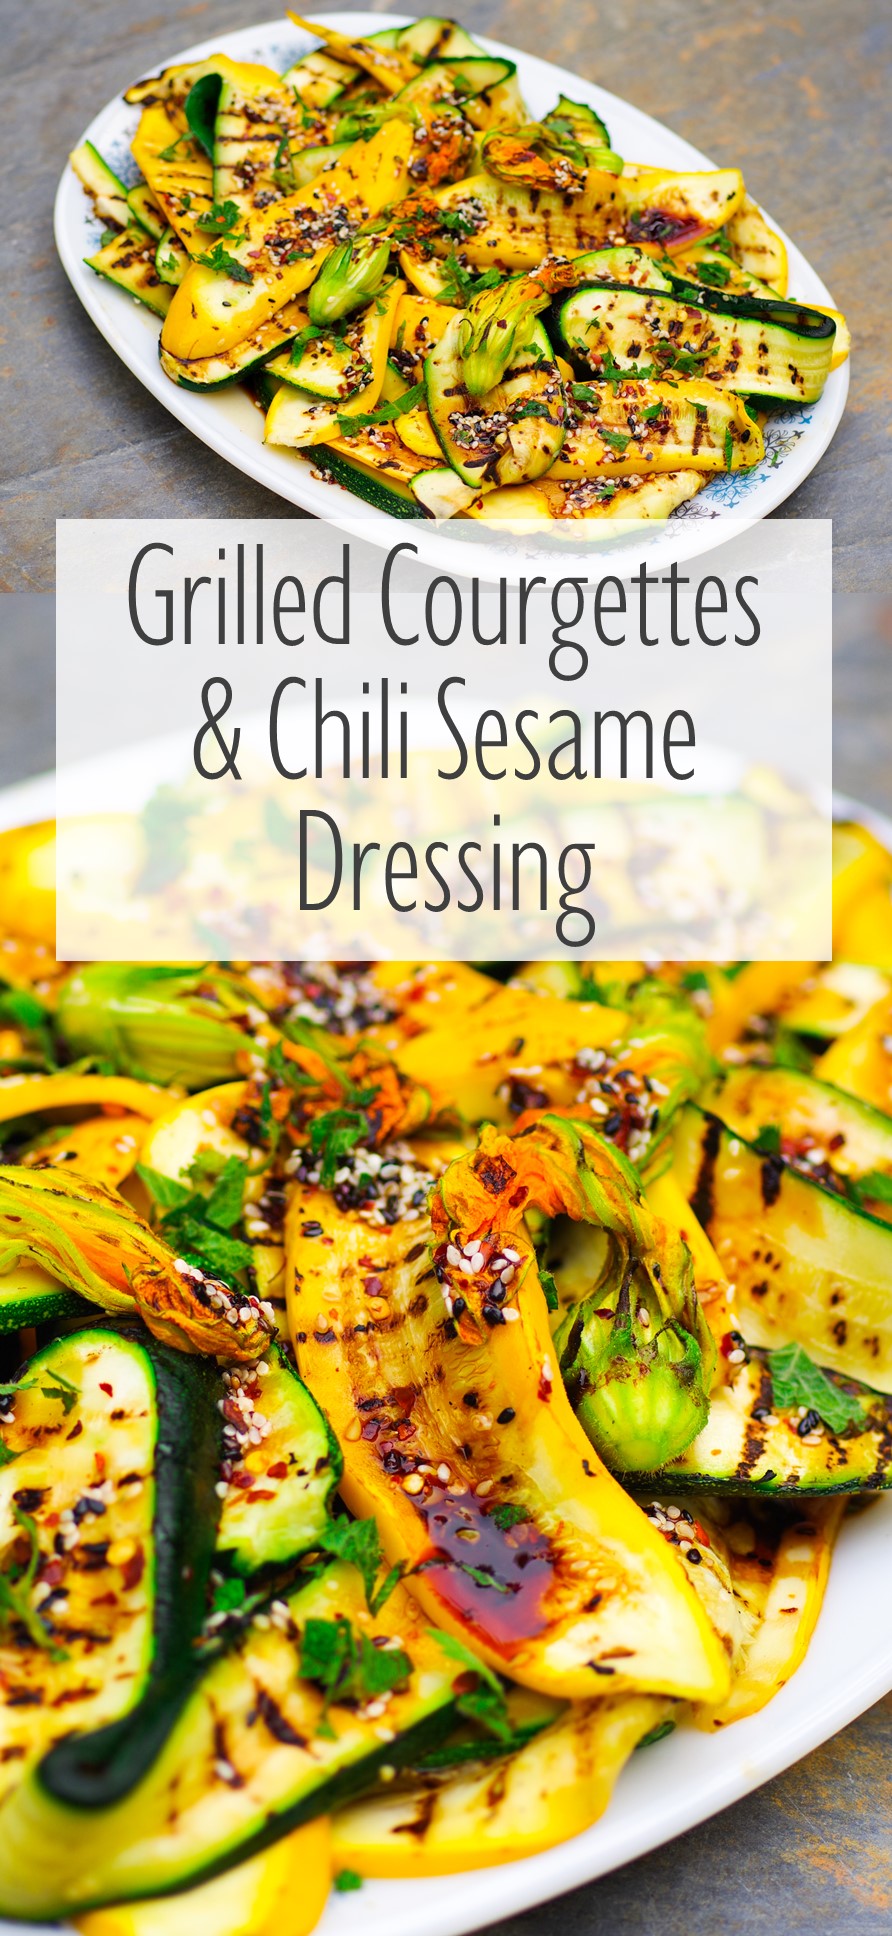 Grilled Courgettes & Chili Sesame Dressing |Euphoric Vegan